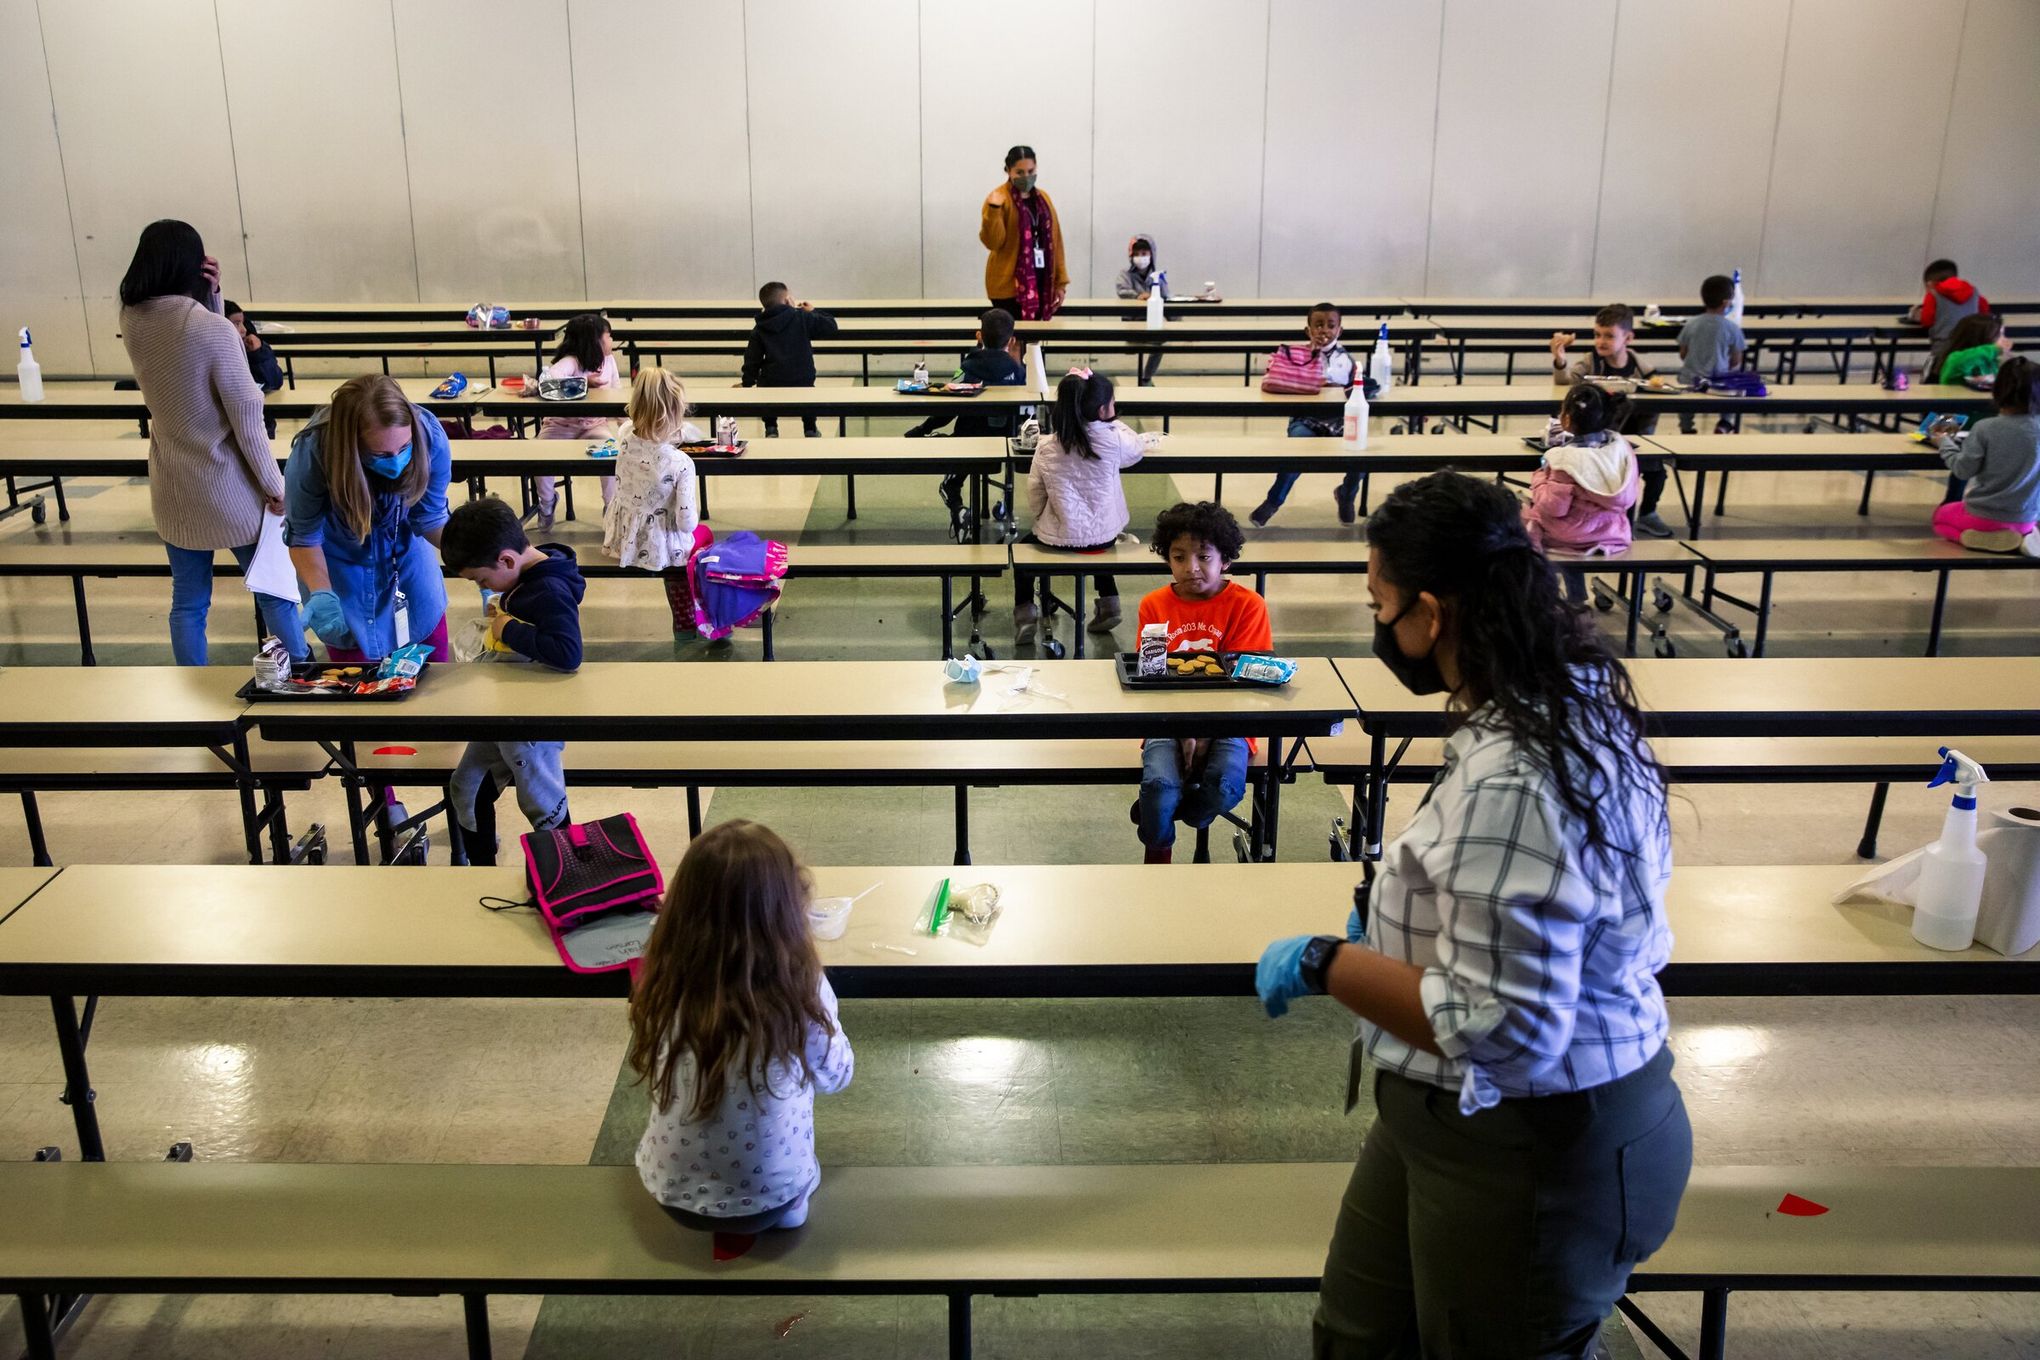 Families Struggle as Pandemic Program Offering Free School Meals